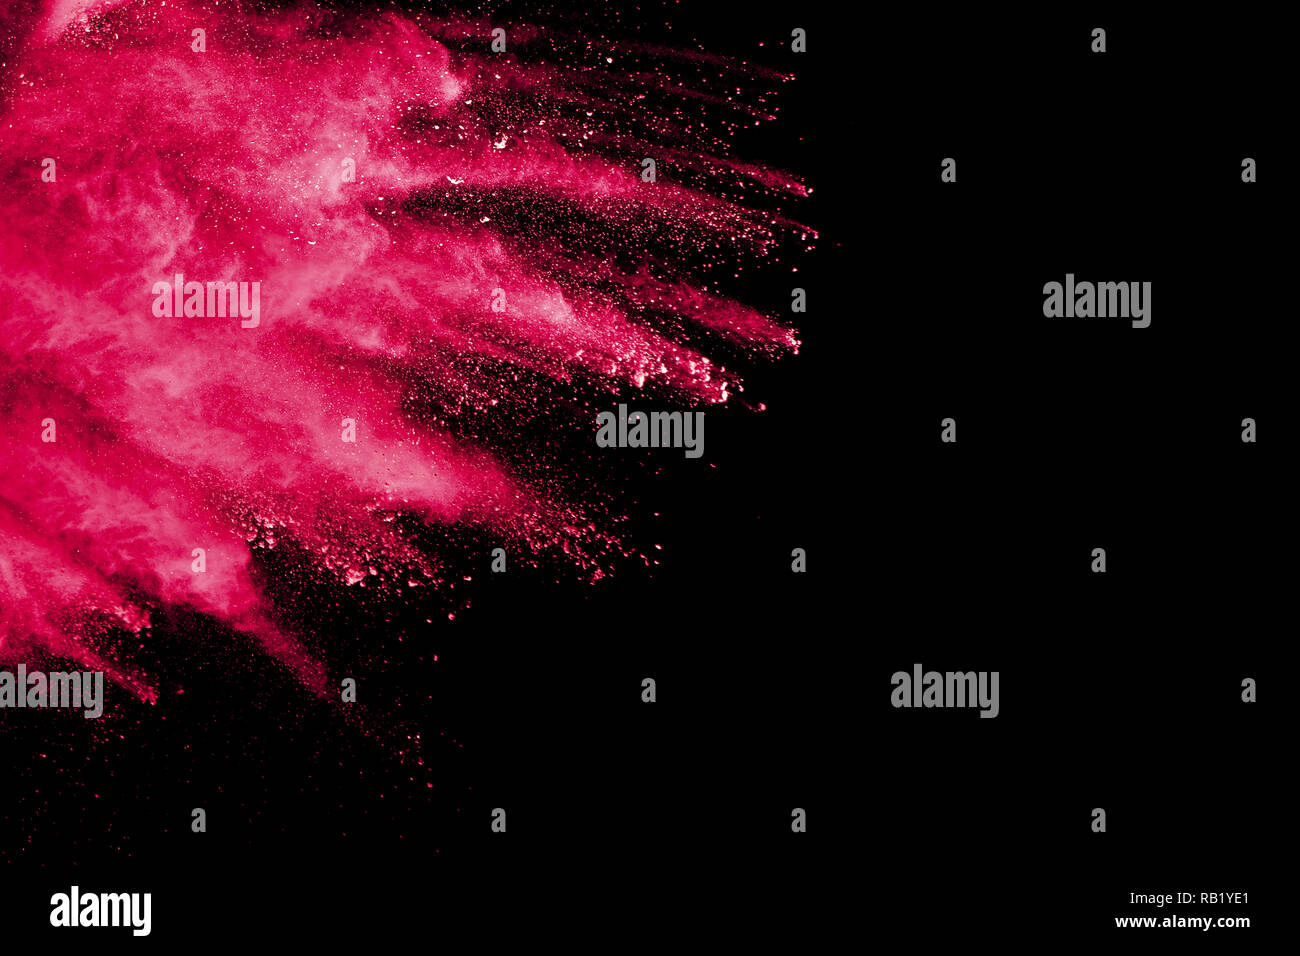 Red color powder explosion on black background.Freeze motion of red dust particles splashing. Stock Photo